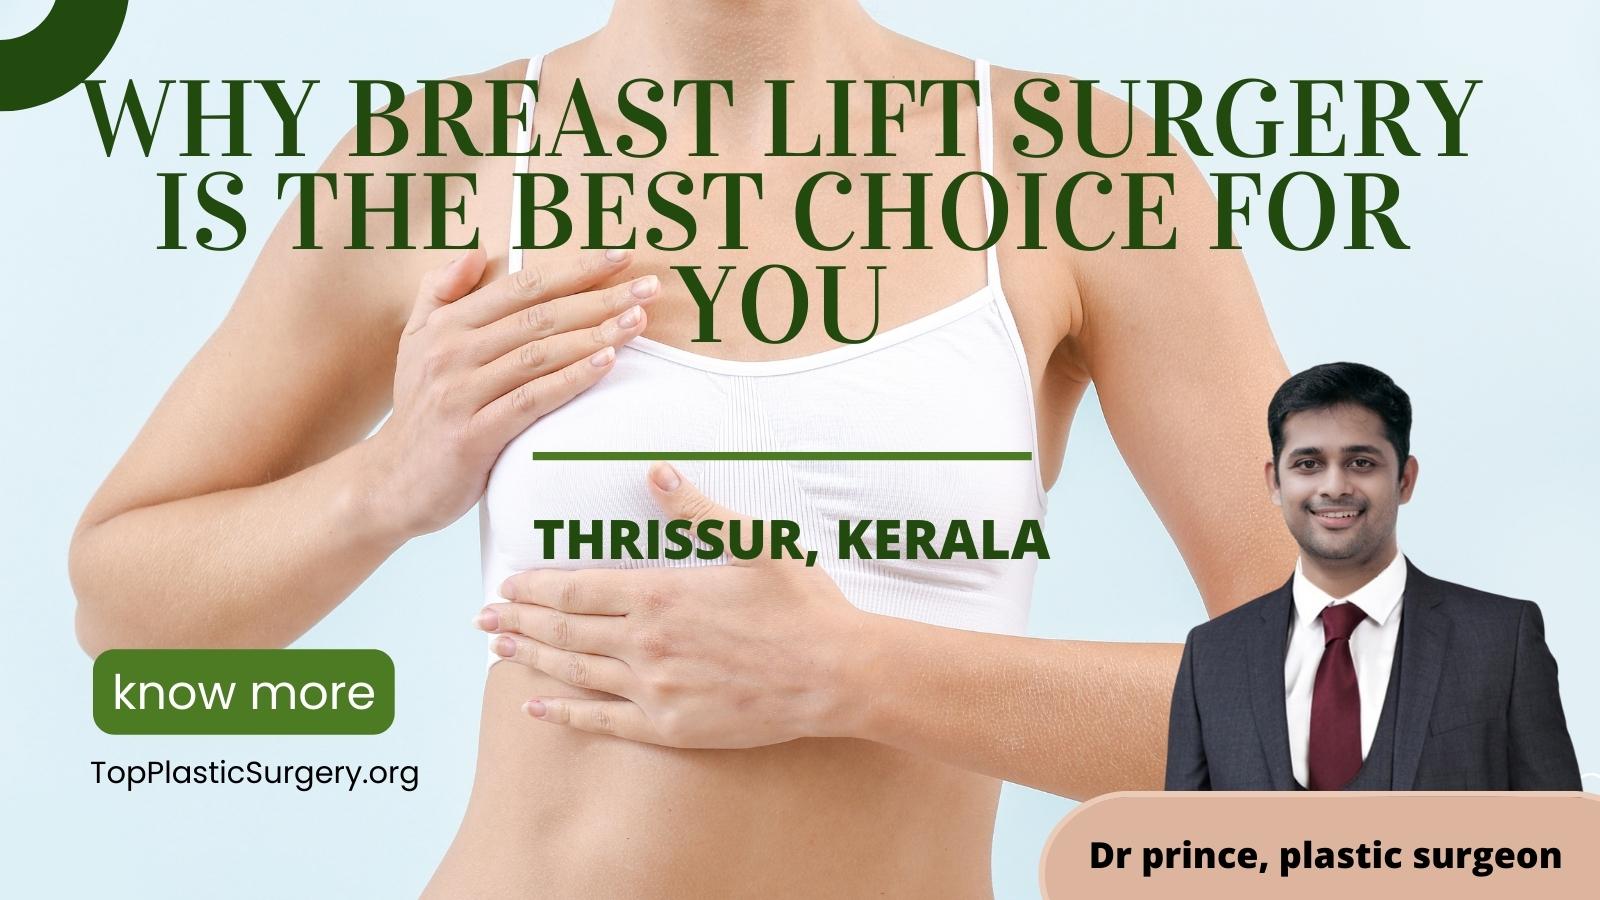 Why Breast Lift Surgery is the Best Choice for You